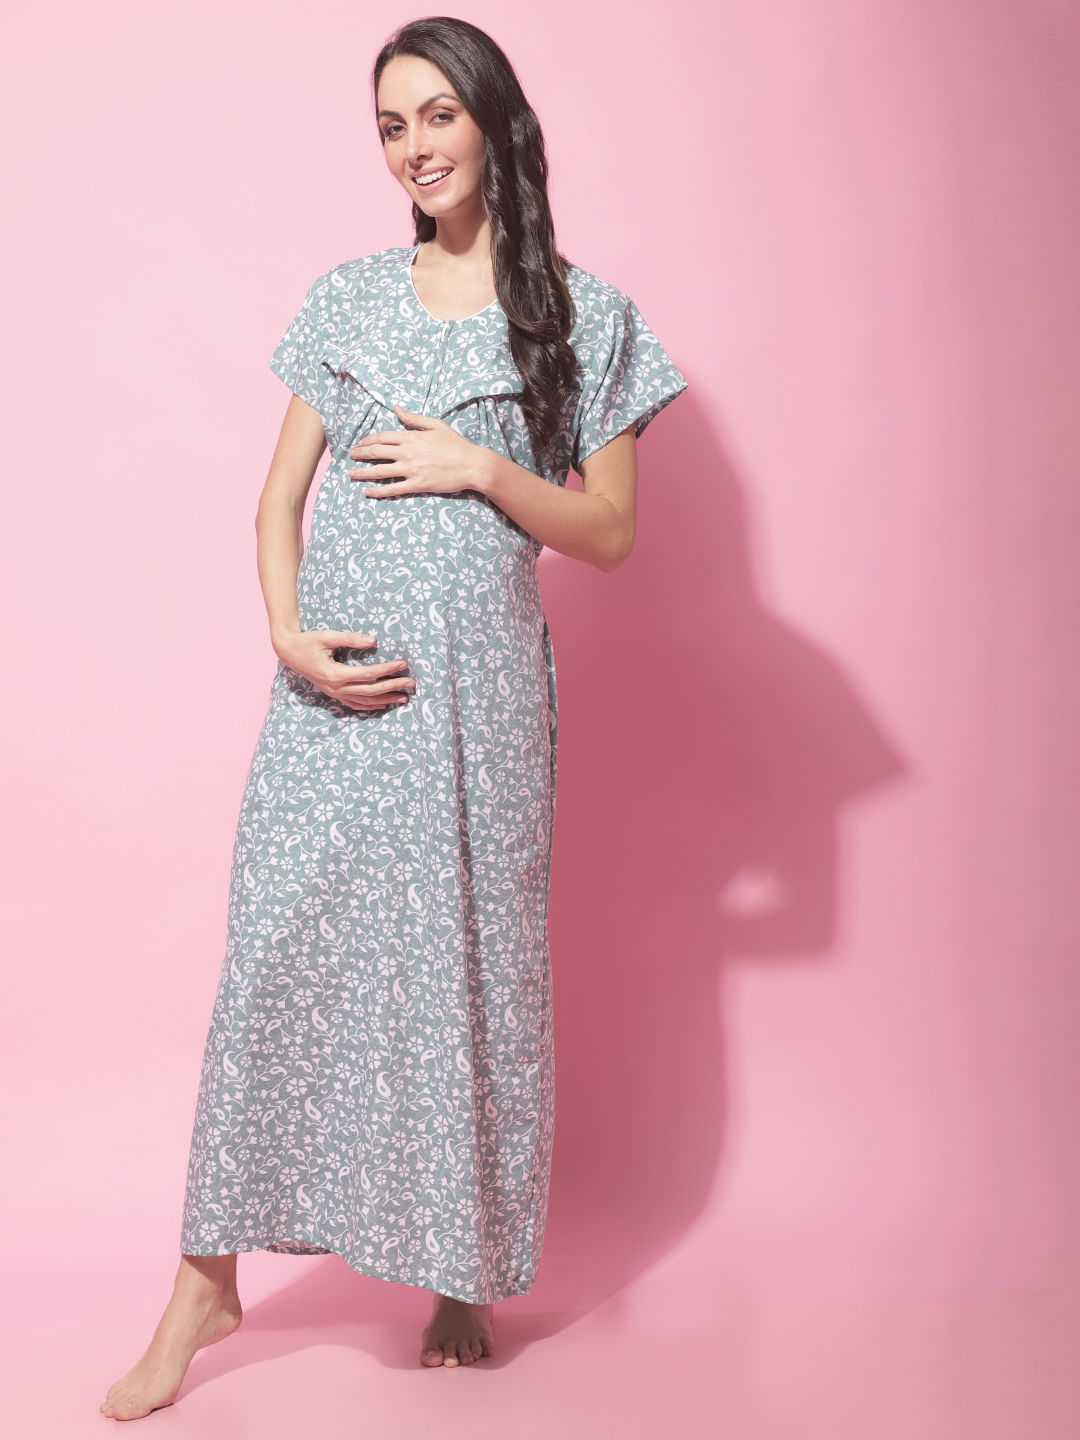 Buy Blue Maternity Cotton Nighty for Women Online at Secret Wish